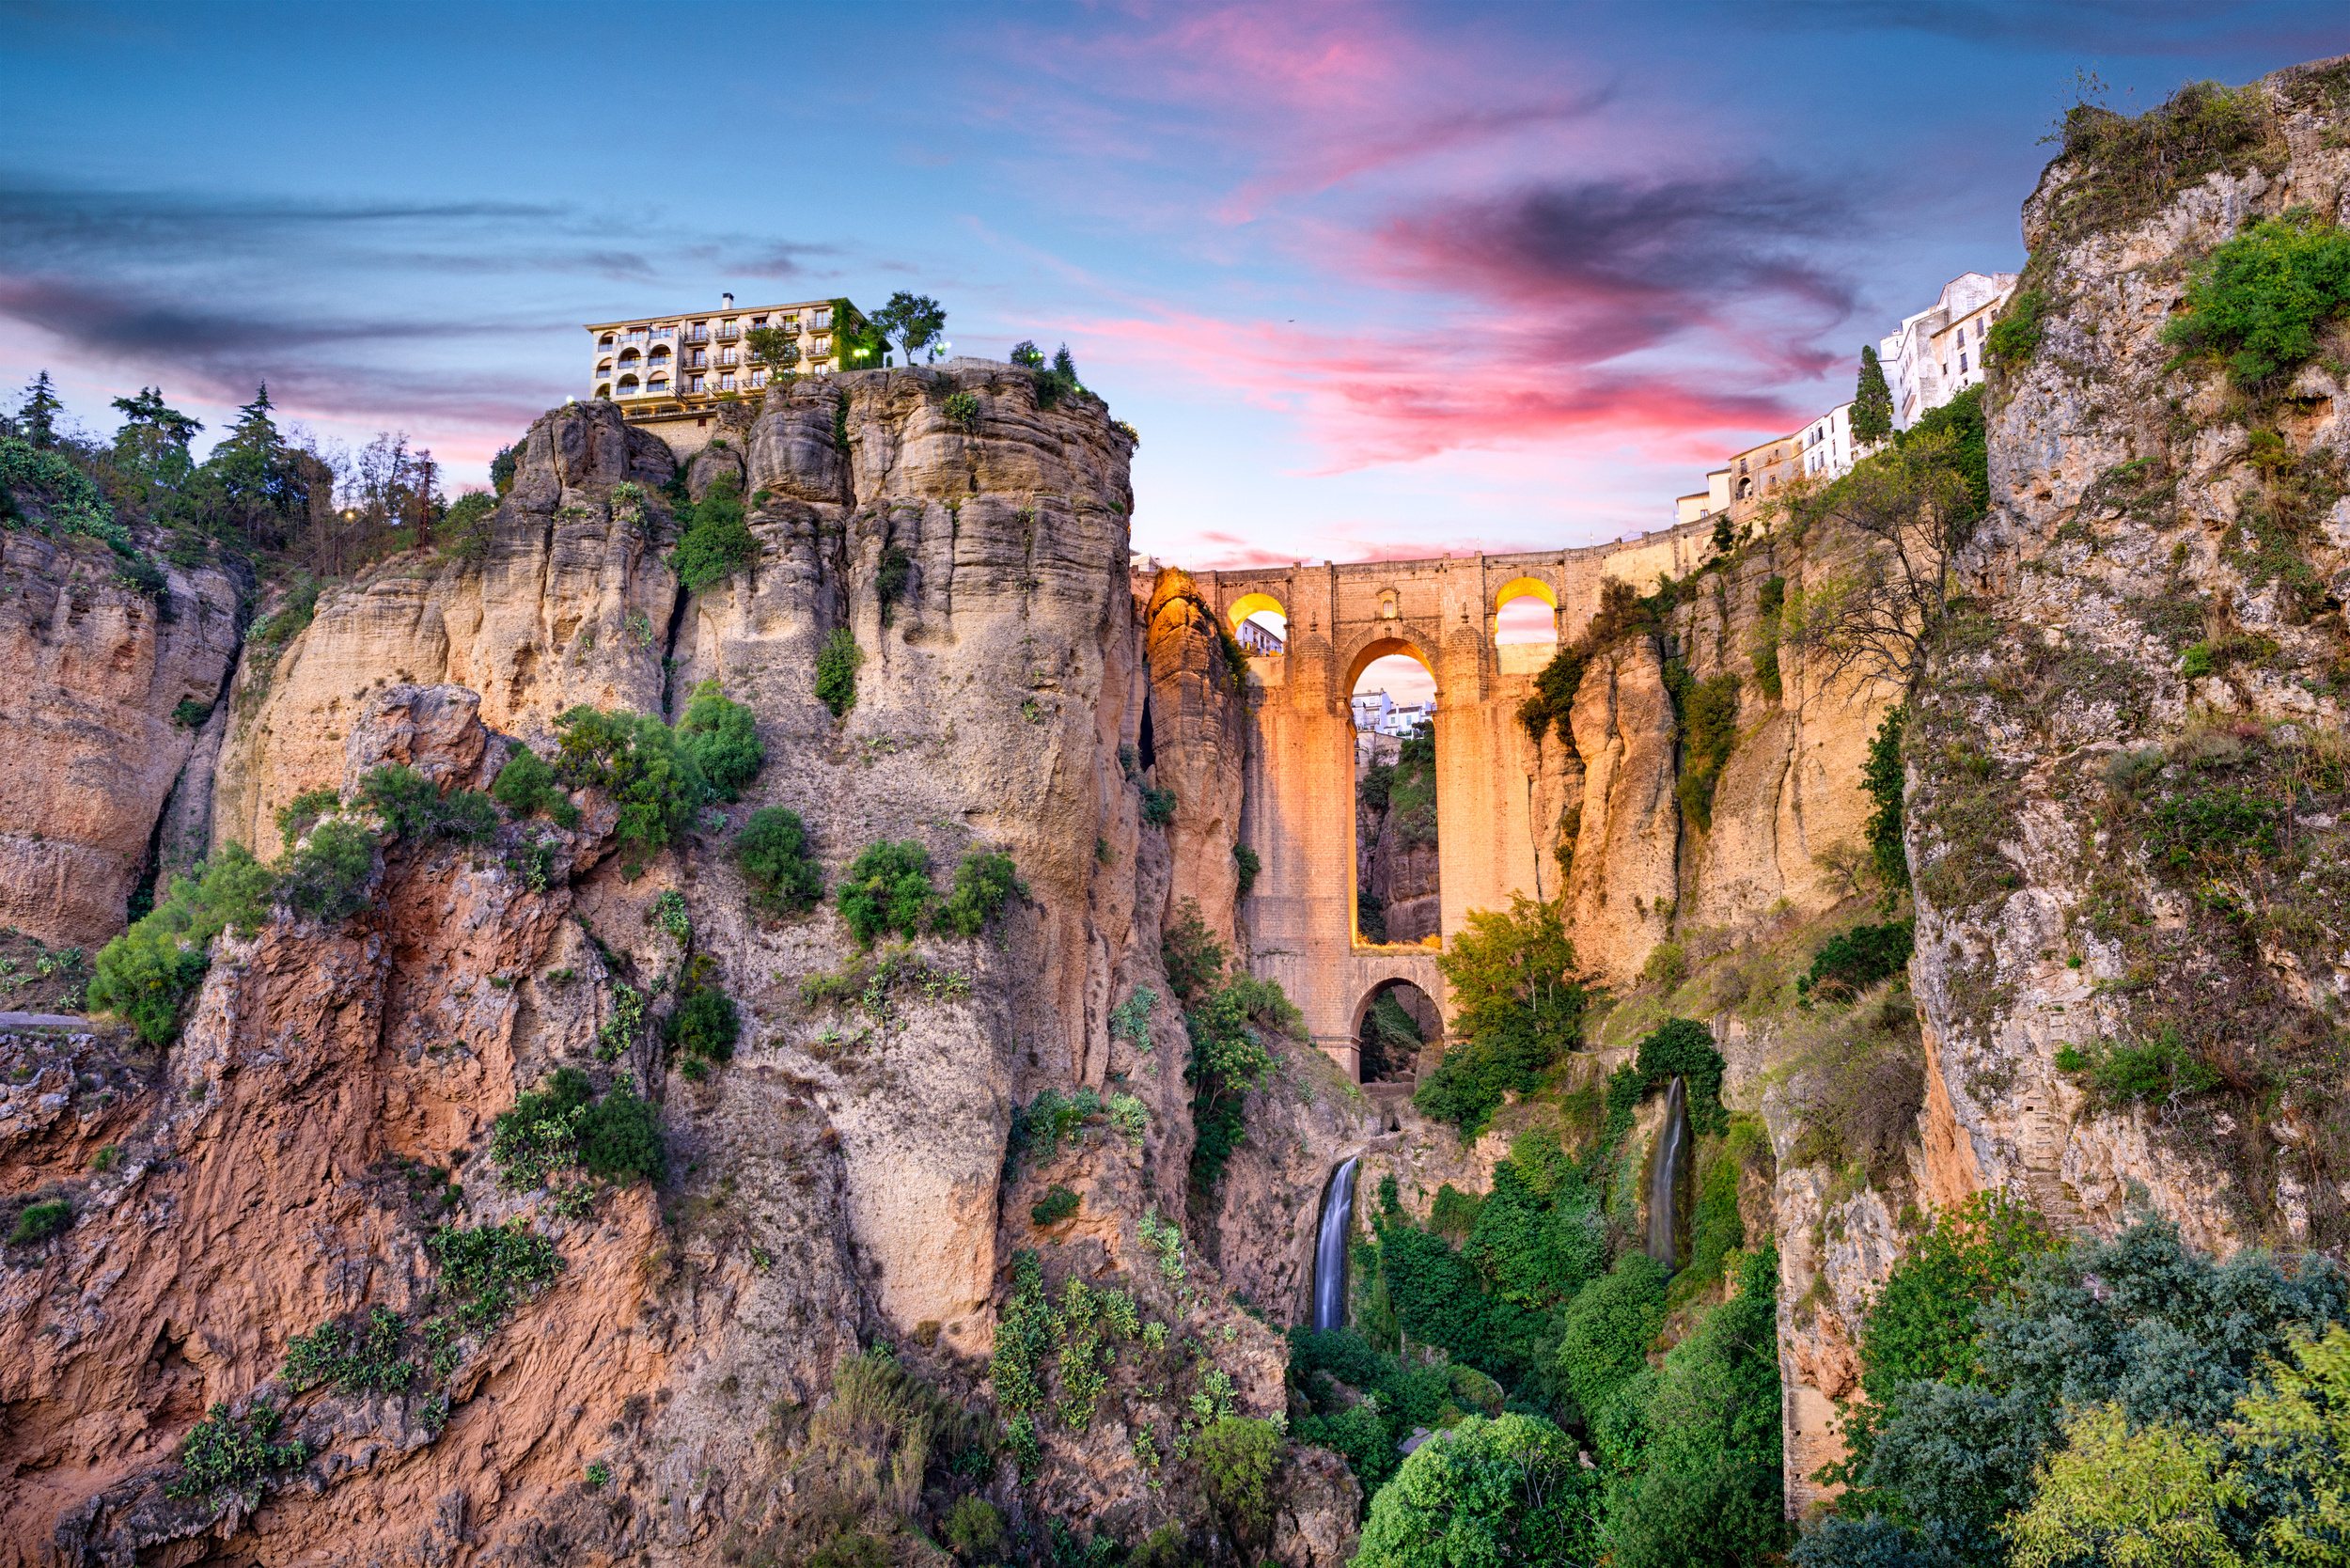 <p>Ronda is a wonderful respite to nearby Malaga. Split by the El Tajo Gorge, the town's dramatic appearance is just one piece of its appeal. Walk the Puente Nuevo, the “New Bridge," and others that connect the two sides of the town. Once you’ve had enough exercise, visit the historic bullring or go wine tasting in the surrounding hillside.</p><p>You may also like: <a href='https://www.yardbarker.com/lifestyle/articles/too_sweet_24_of_the_oldest_candy_bars_still_available_031524/s1__39111177'>Too sweet: 24 of the oldest candy bars still available</a></p>